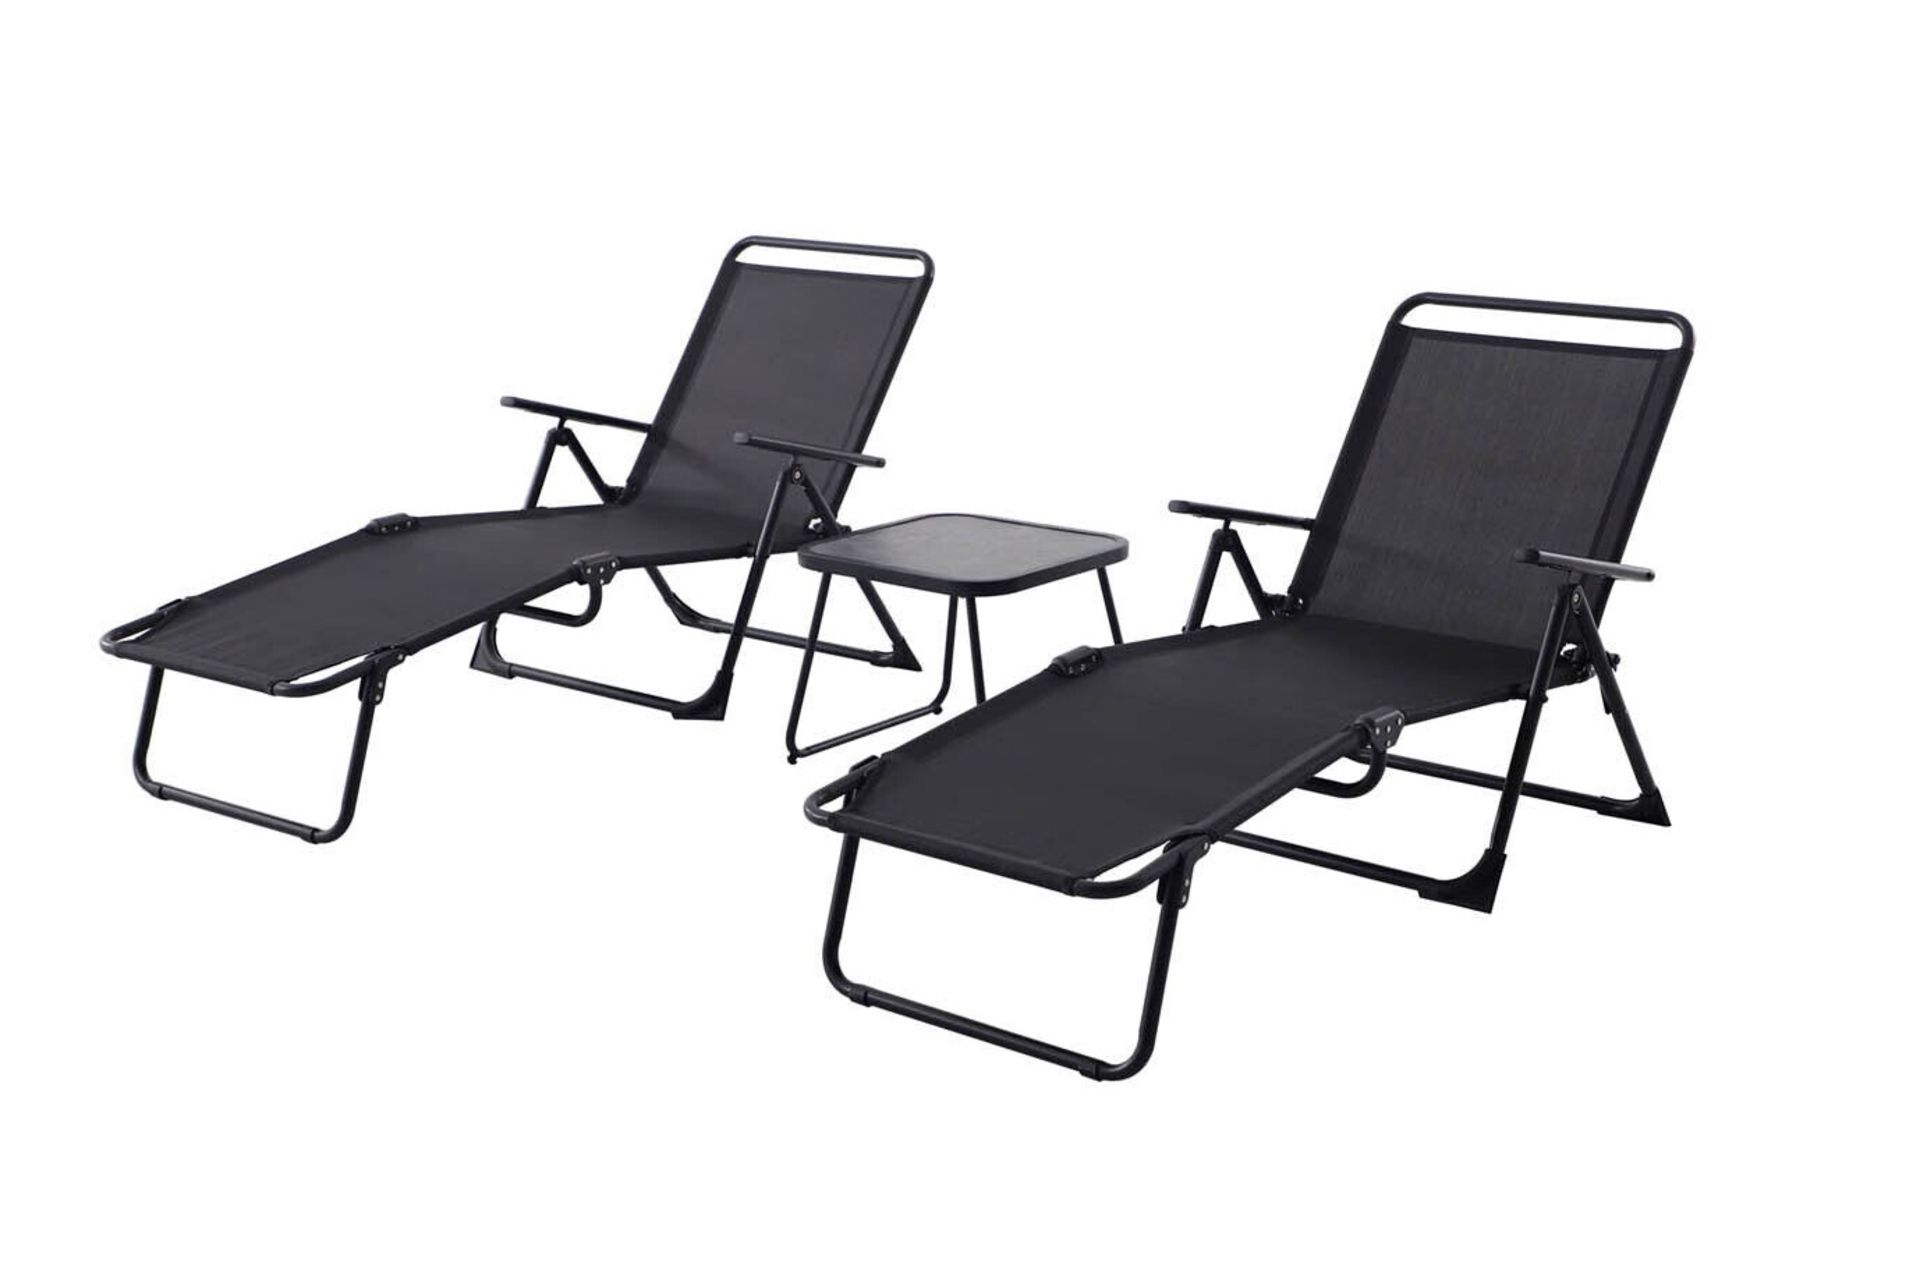 1 X BRAND NEW BAHAMA 2 SEATER FOLDABLE SUNLOUNGER AND COFFEE TABLE SET - IN BLACK COLOUR - IN 1 BOX